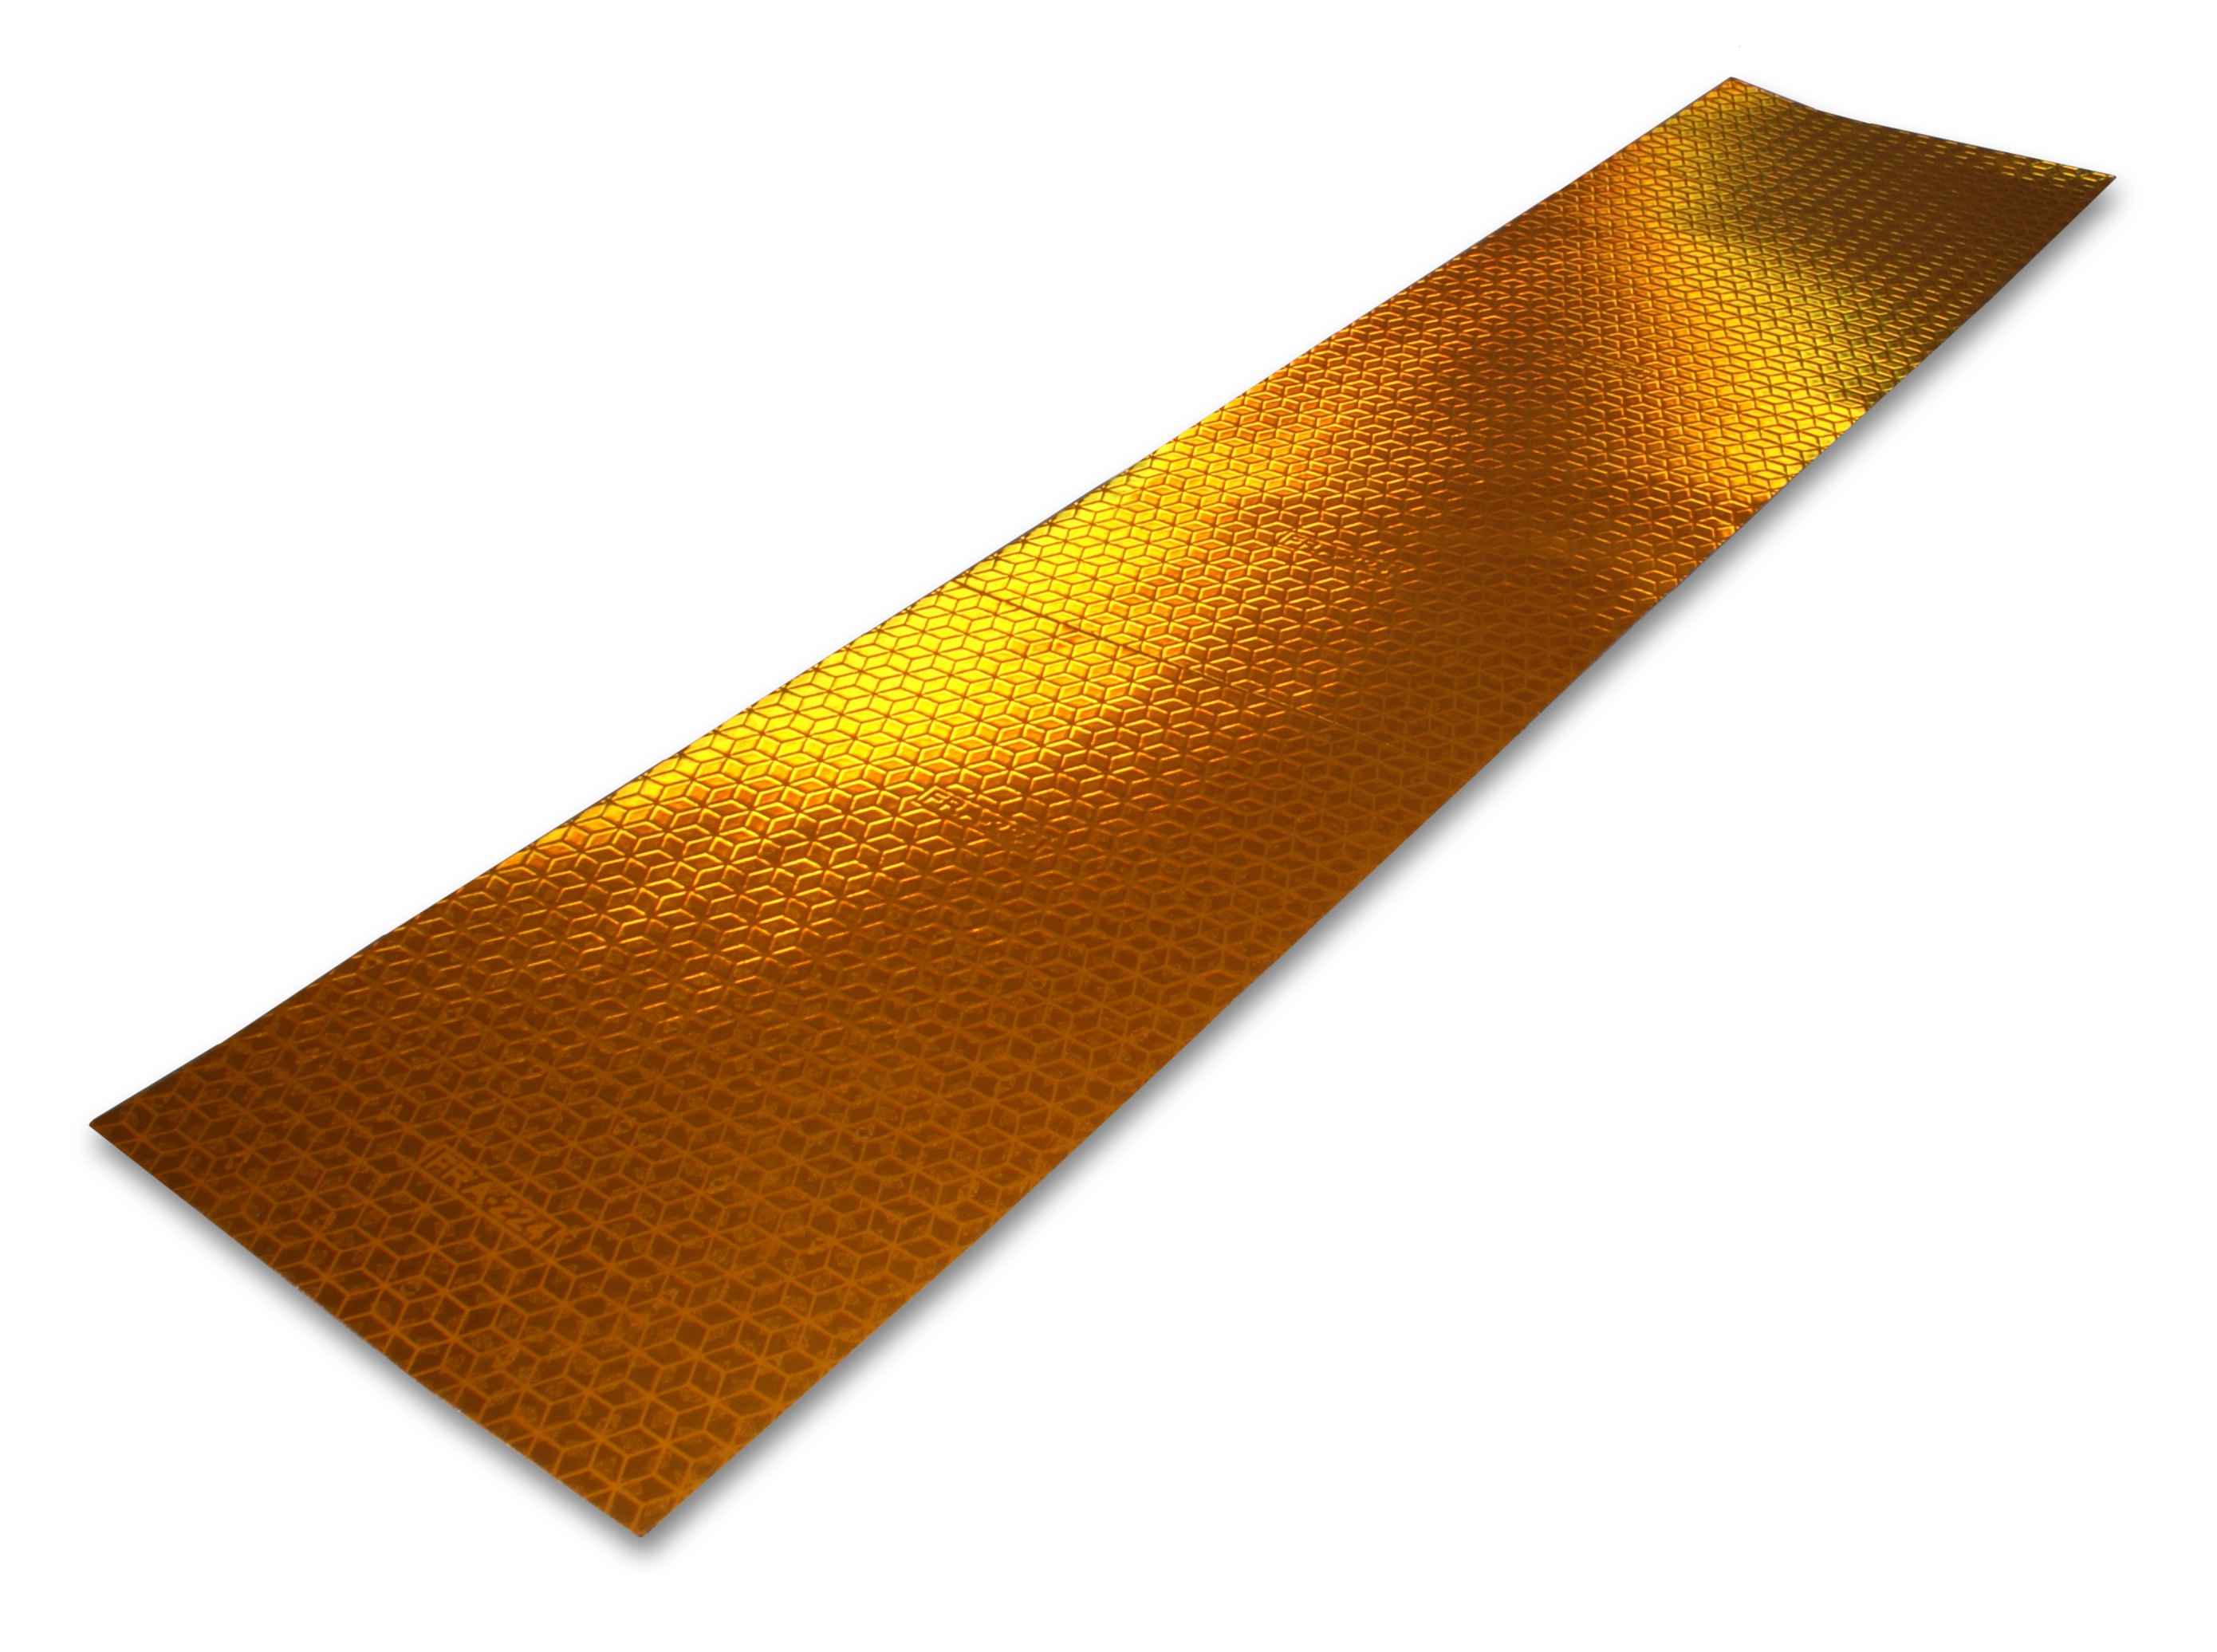 Reflective Tape Strip, 4 by 18-Inches Long, Yellow